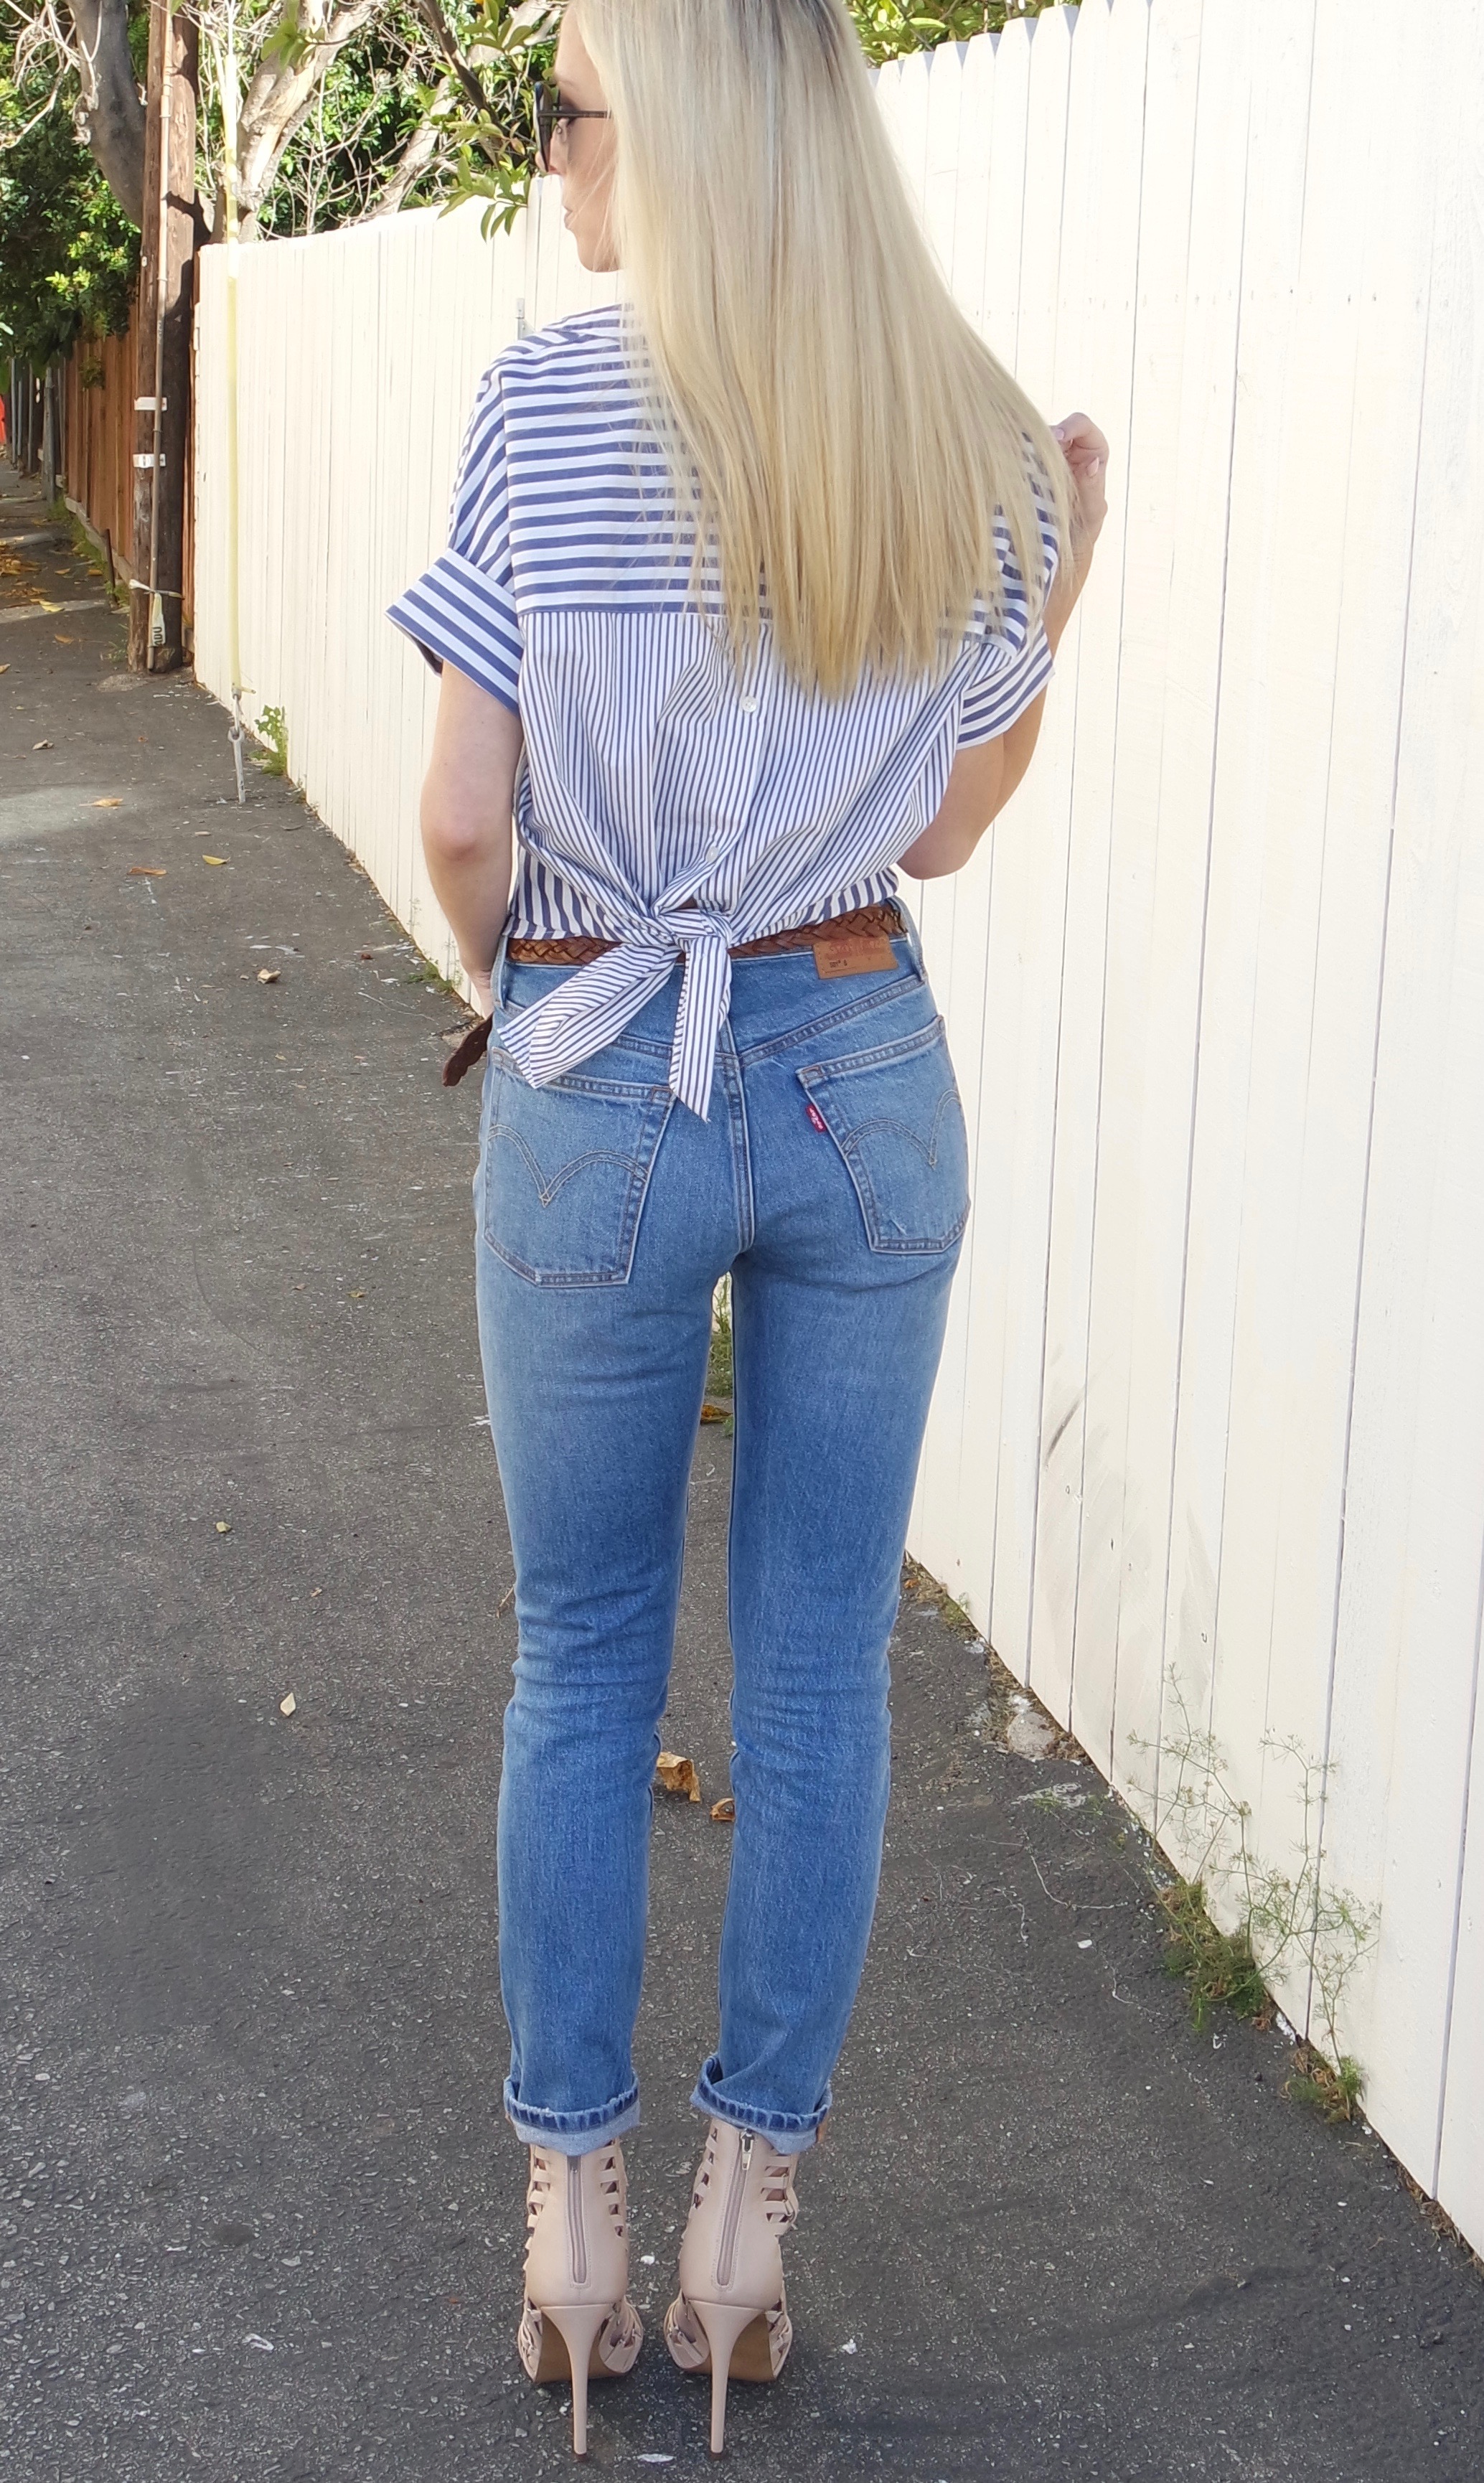 Top Jean Picks from Levi's || Not Just Your Mom's Jeans